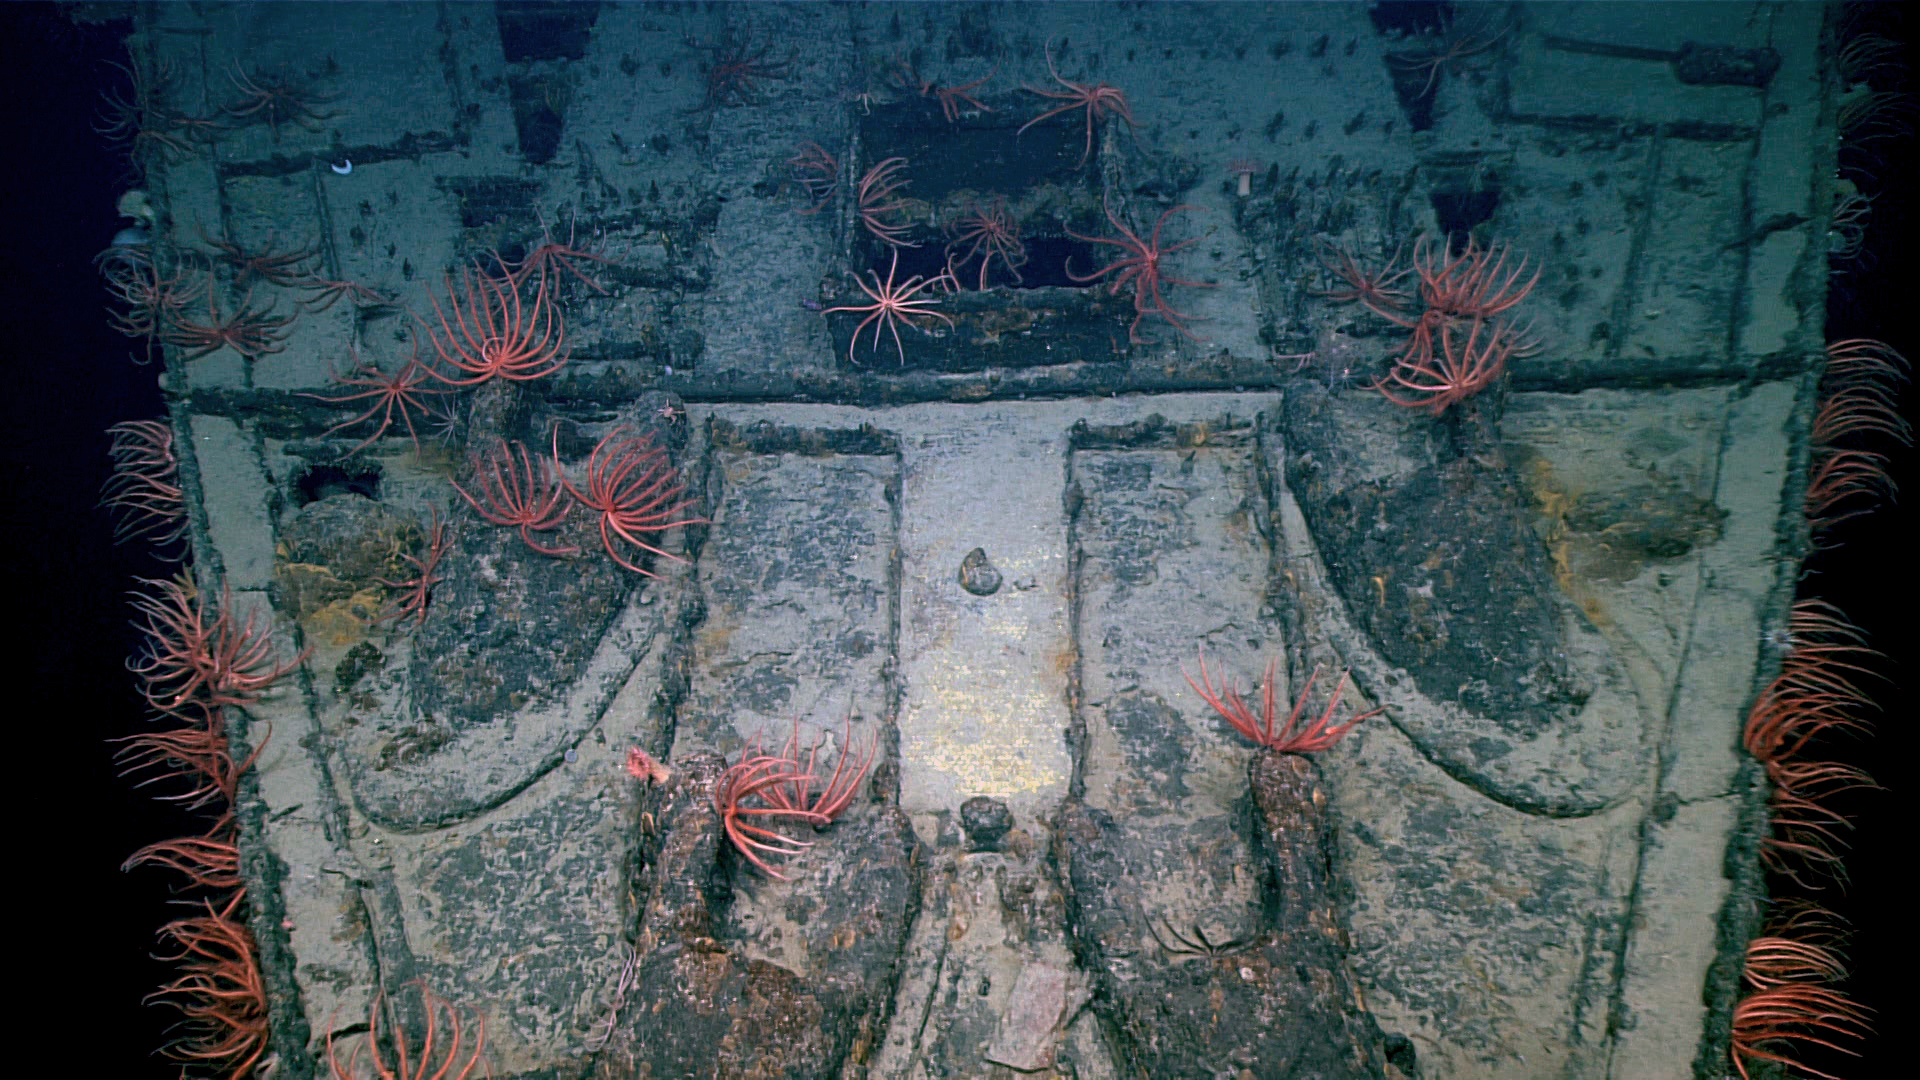 This view of the USS Baltimore foredeck shows the forecastle and upper hull strakes have been removed, likely to aid the scuttling of the ship. As in this photo, brisingid sea stars dominated much of the available surface on the ship.